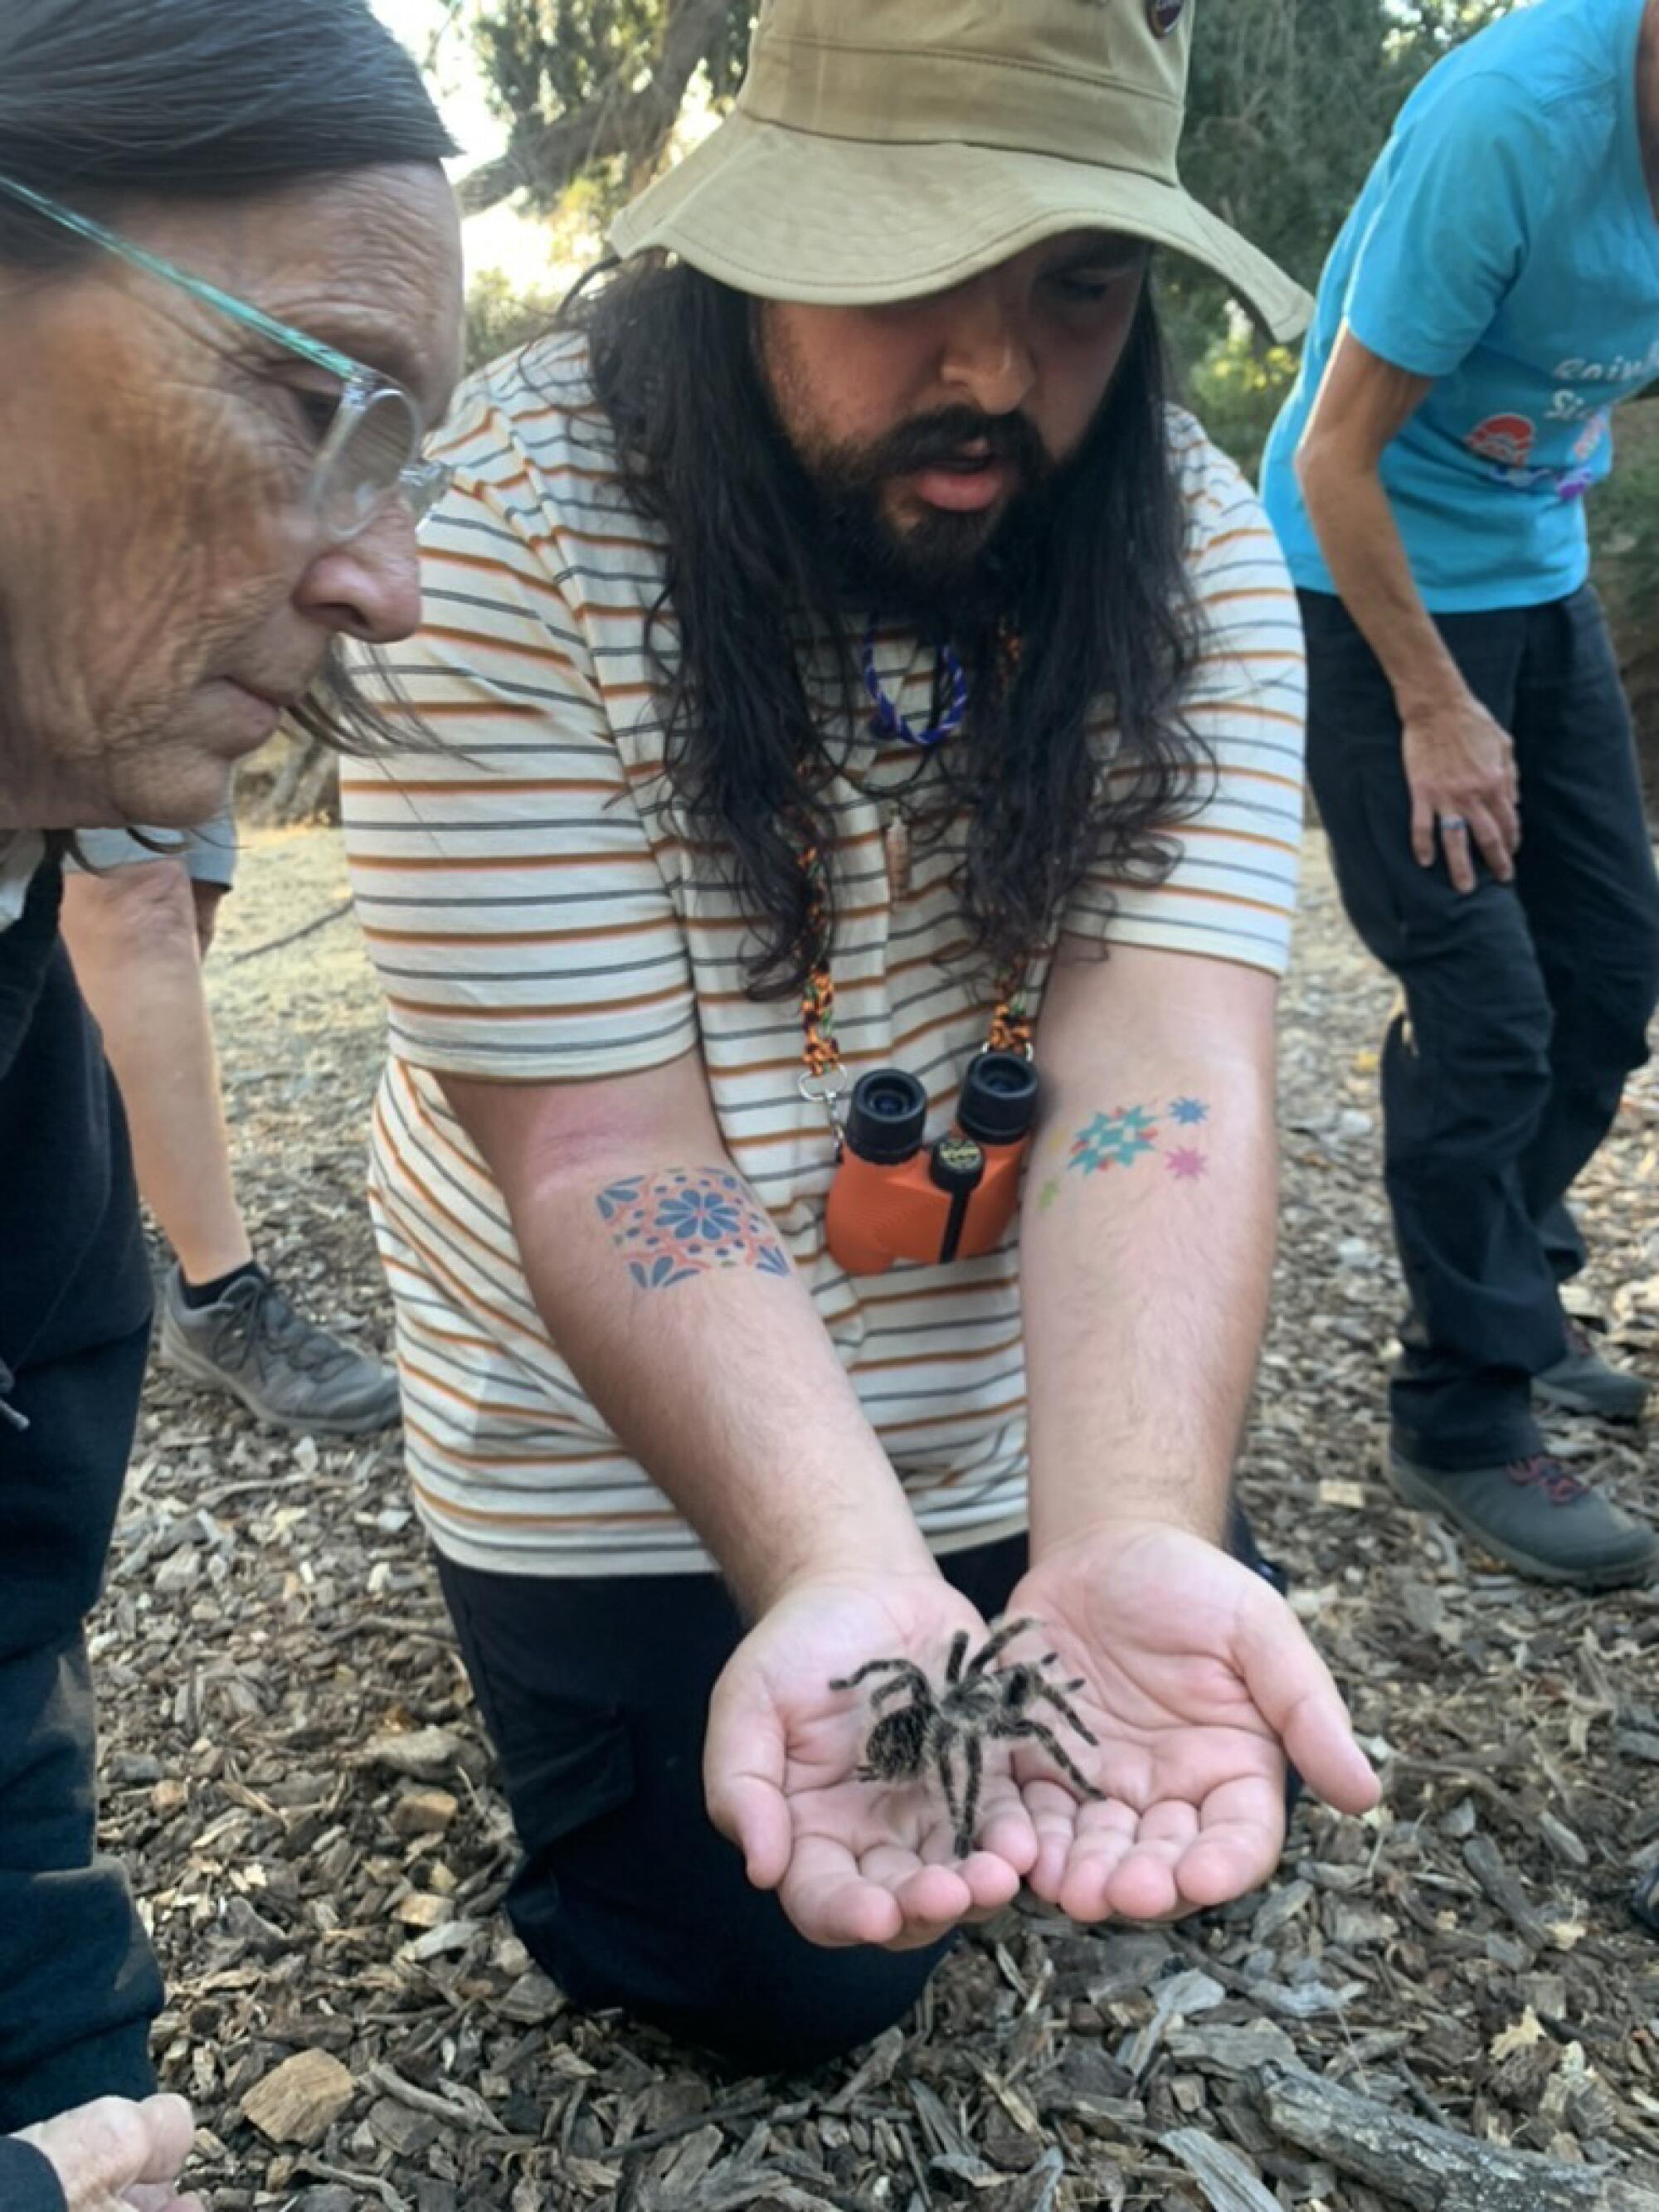 A man kneeling on the ground, holding out a tarantula in his cupped hands as others look on